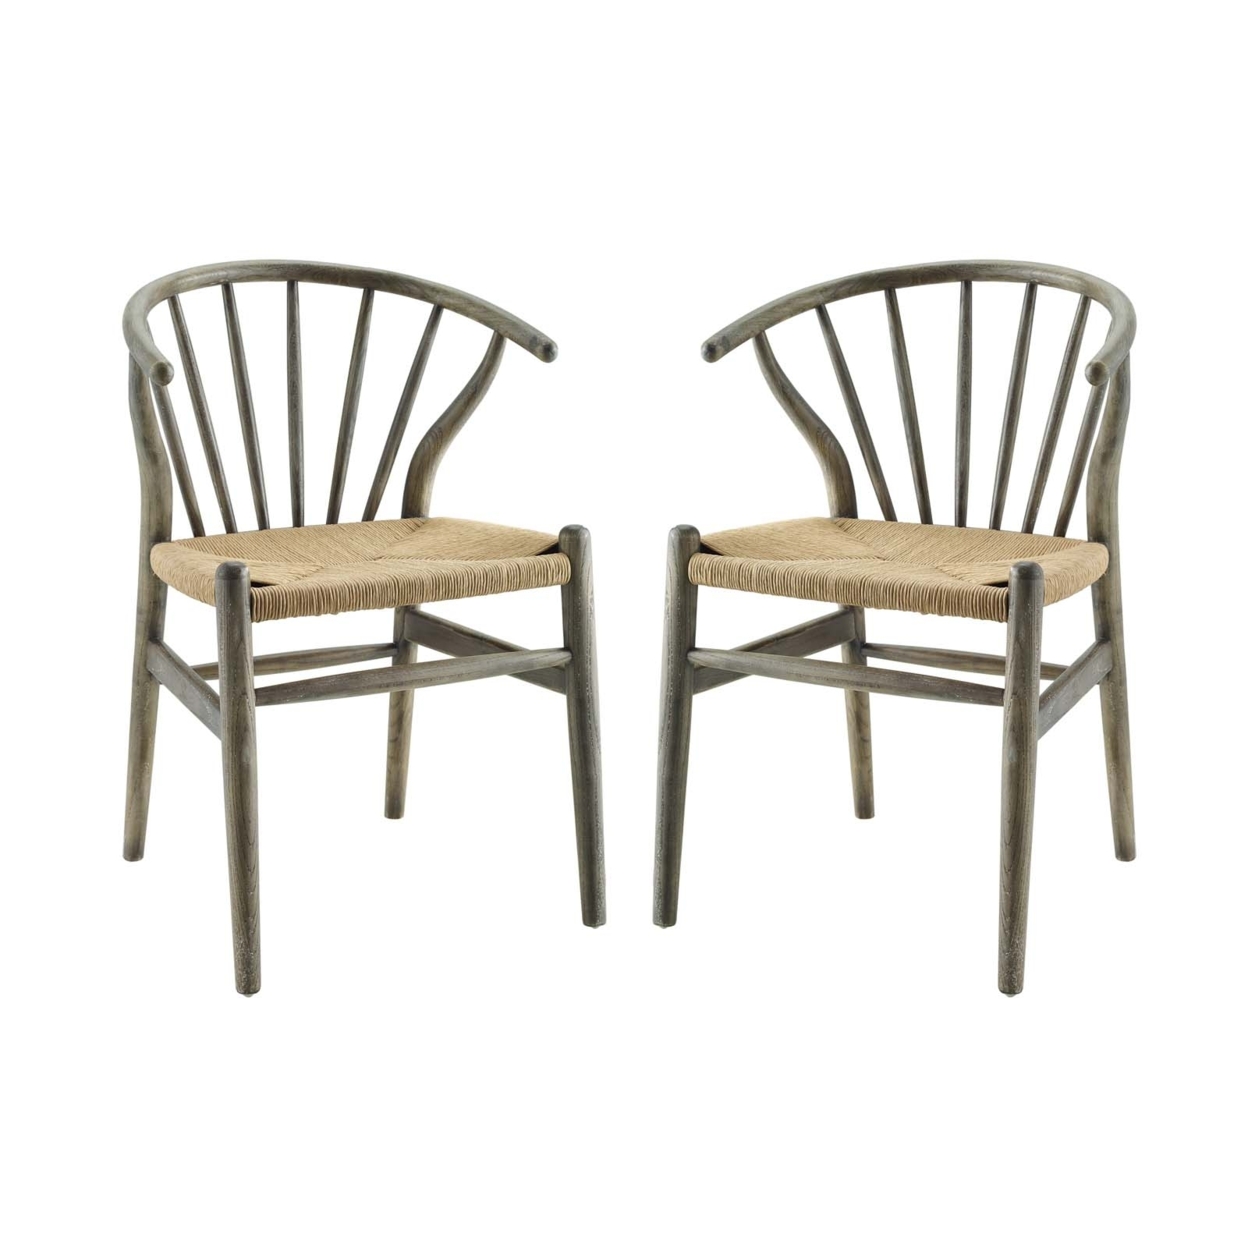 Flourish Spindle Wood Dining Side Chair Set Of 2, Gray